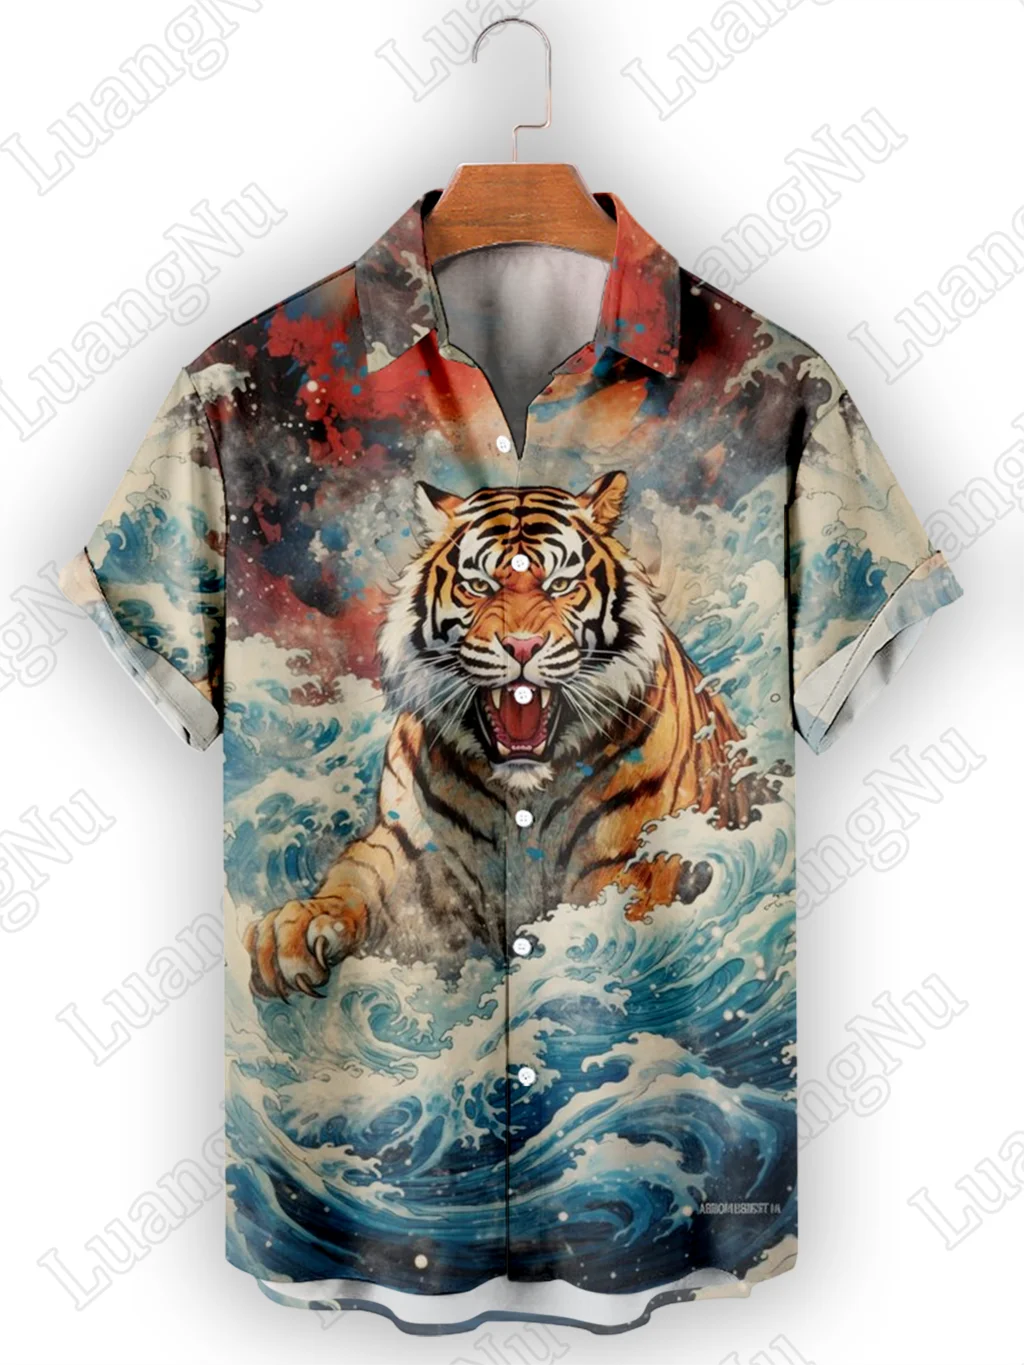 

2023 New Summer Men's Shirts Tiger Print Causal Beach Party Camisa Para Hombre Clothing High Quality Short Sleeve Tops Plus Size